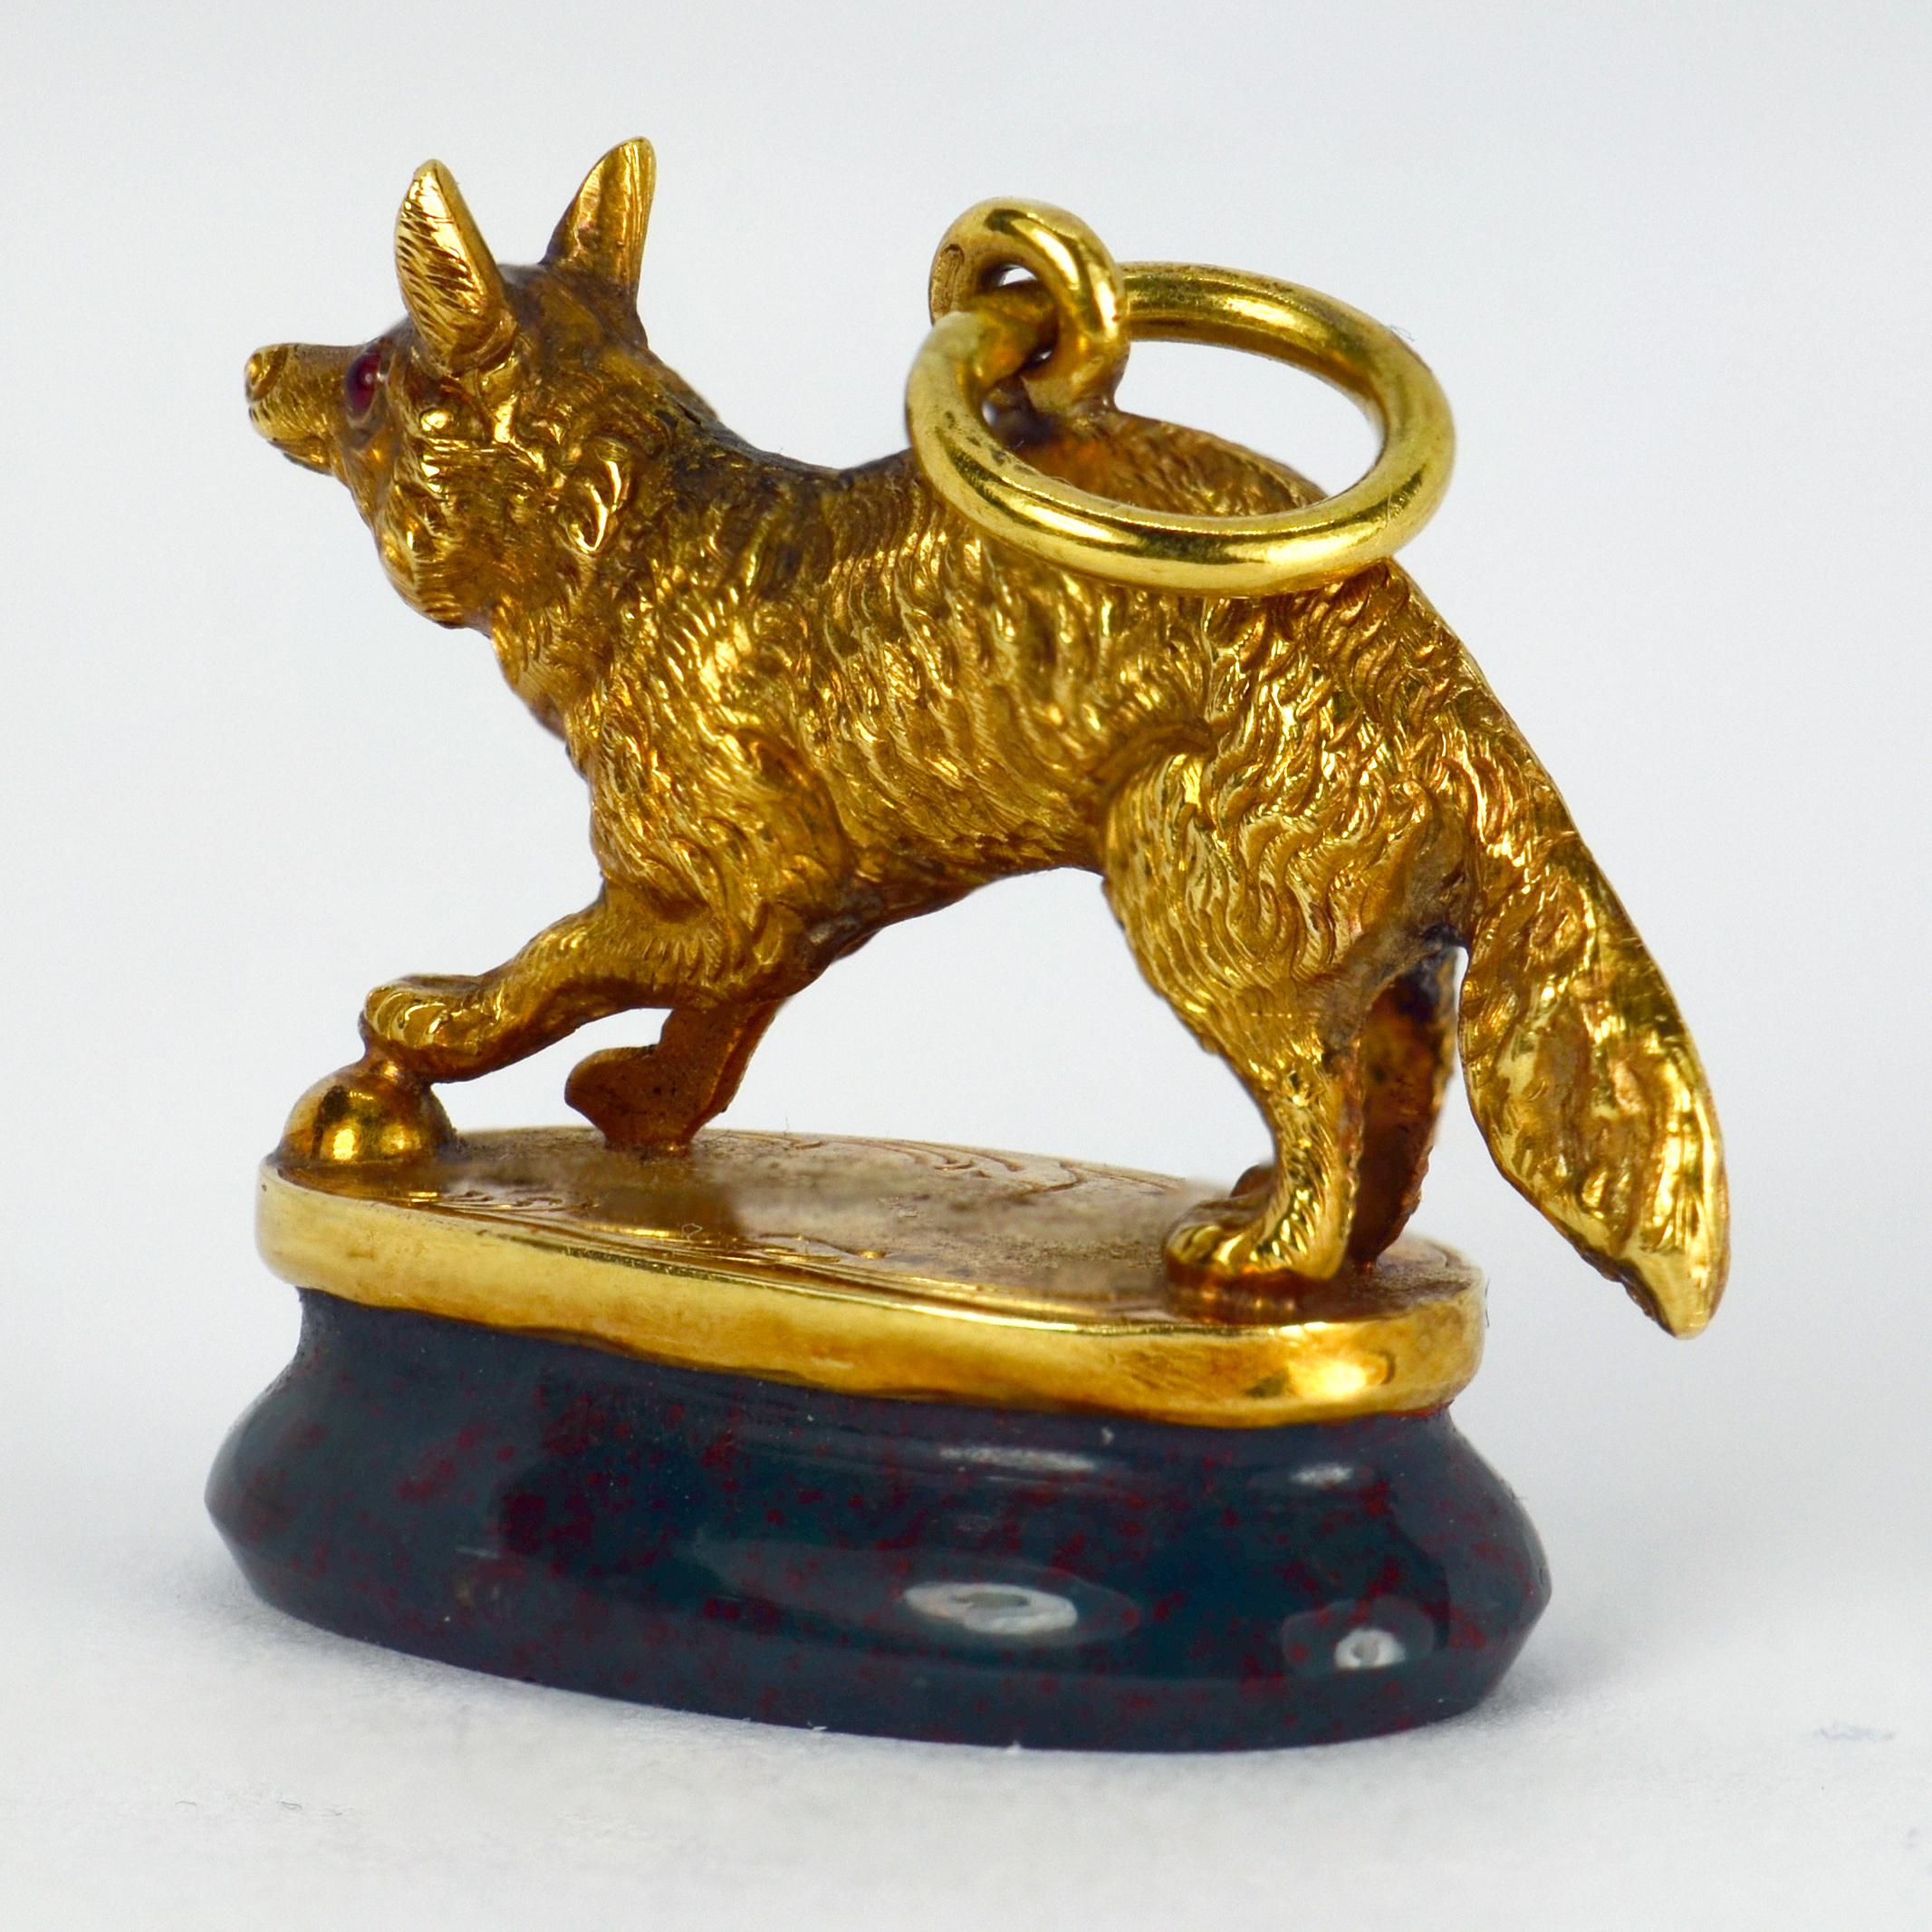 A French 18 karat (18K) yellow gold charm pendant designed as a realistically modelled fox with red ruby eyes standing on top of a bloodstone seal tablet. Stamped with the French eagle’s head for 18 karat gold.

Dimensions: 2.3 x 3 x 1.2 cm (not